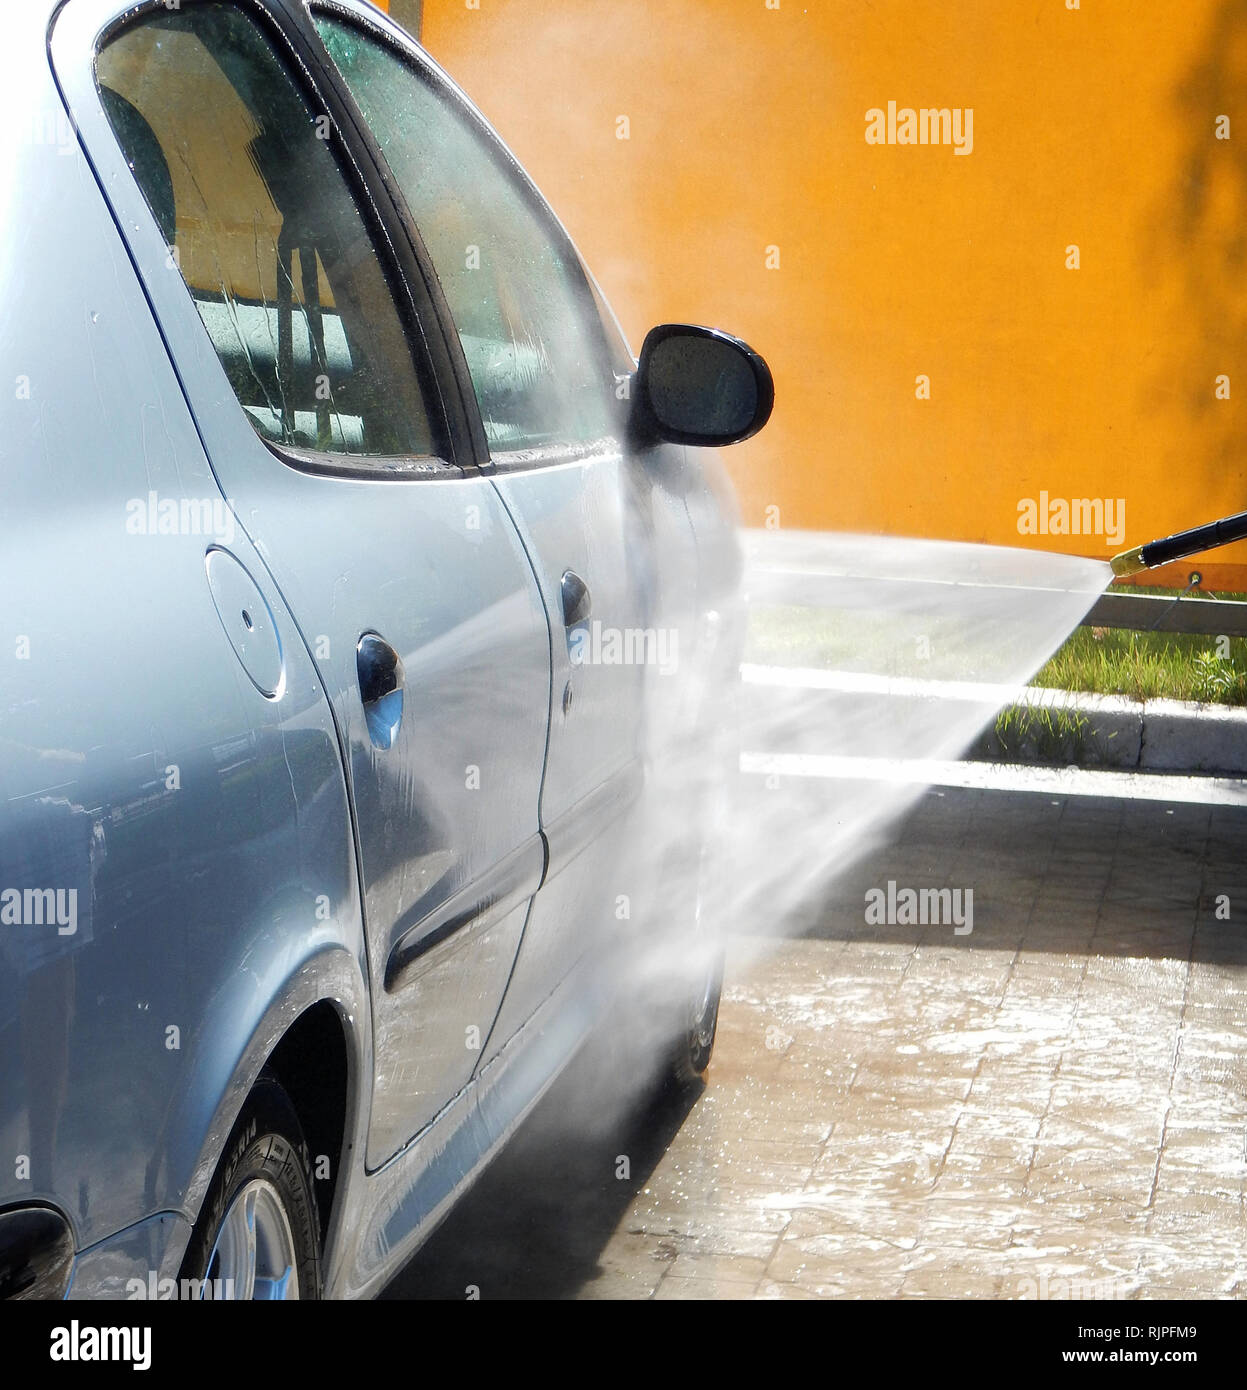 Pressure Washer Machine Cleaning Foam From The Car Door Stock Photo